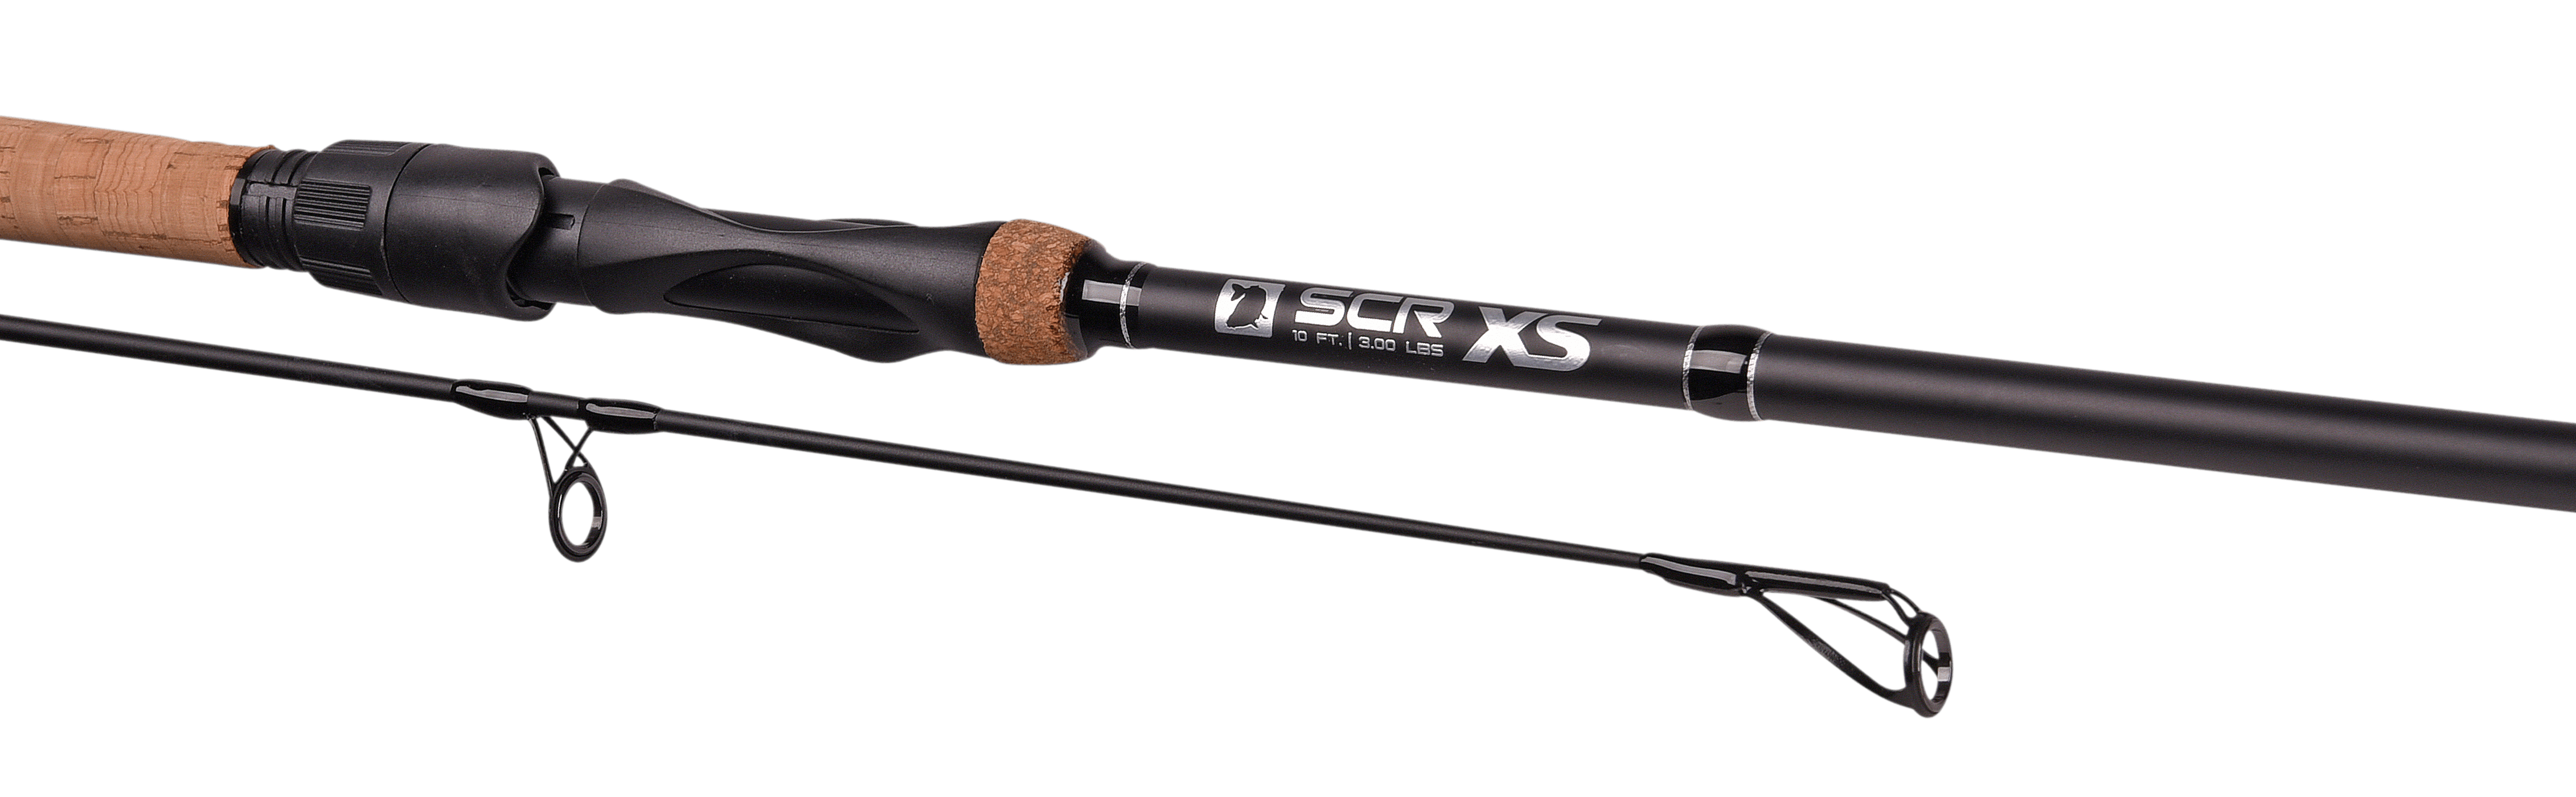 SCR_Rods_XS_Cork_Overview